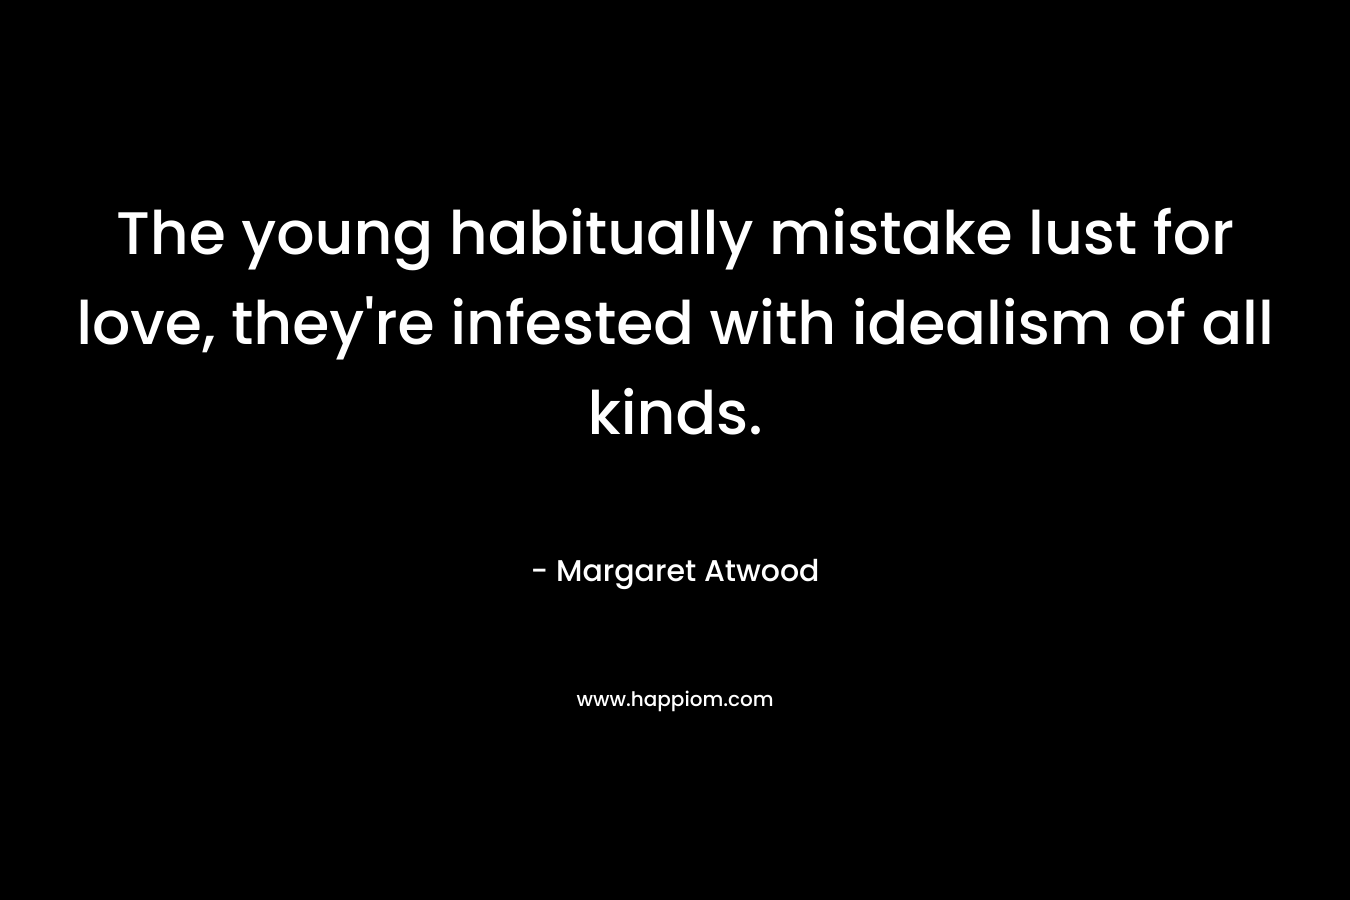 The young habitually mistake lust for love, they're infested with idealism of all kinds.